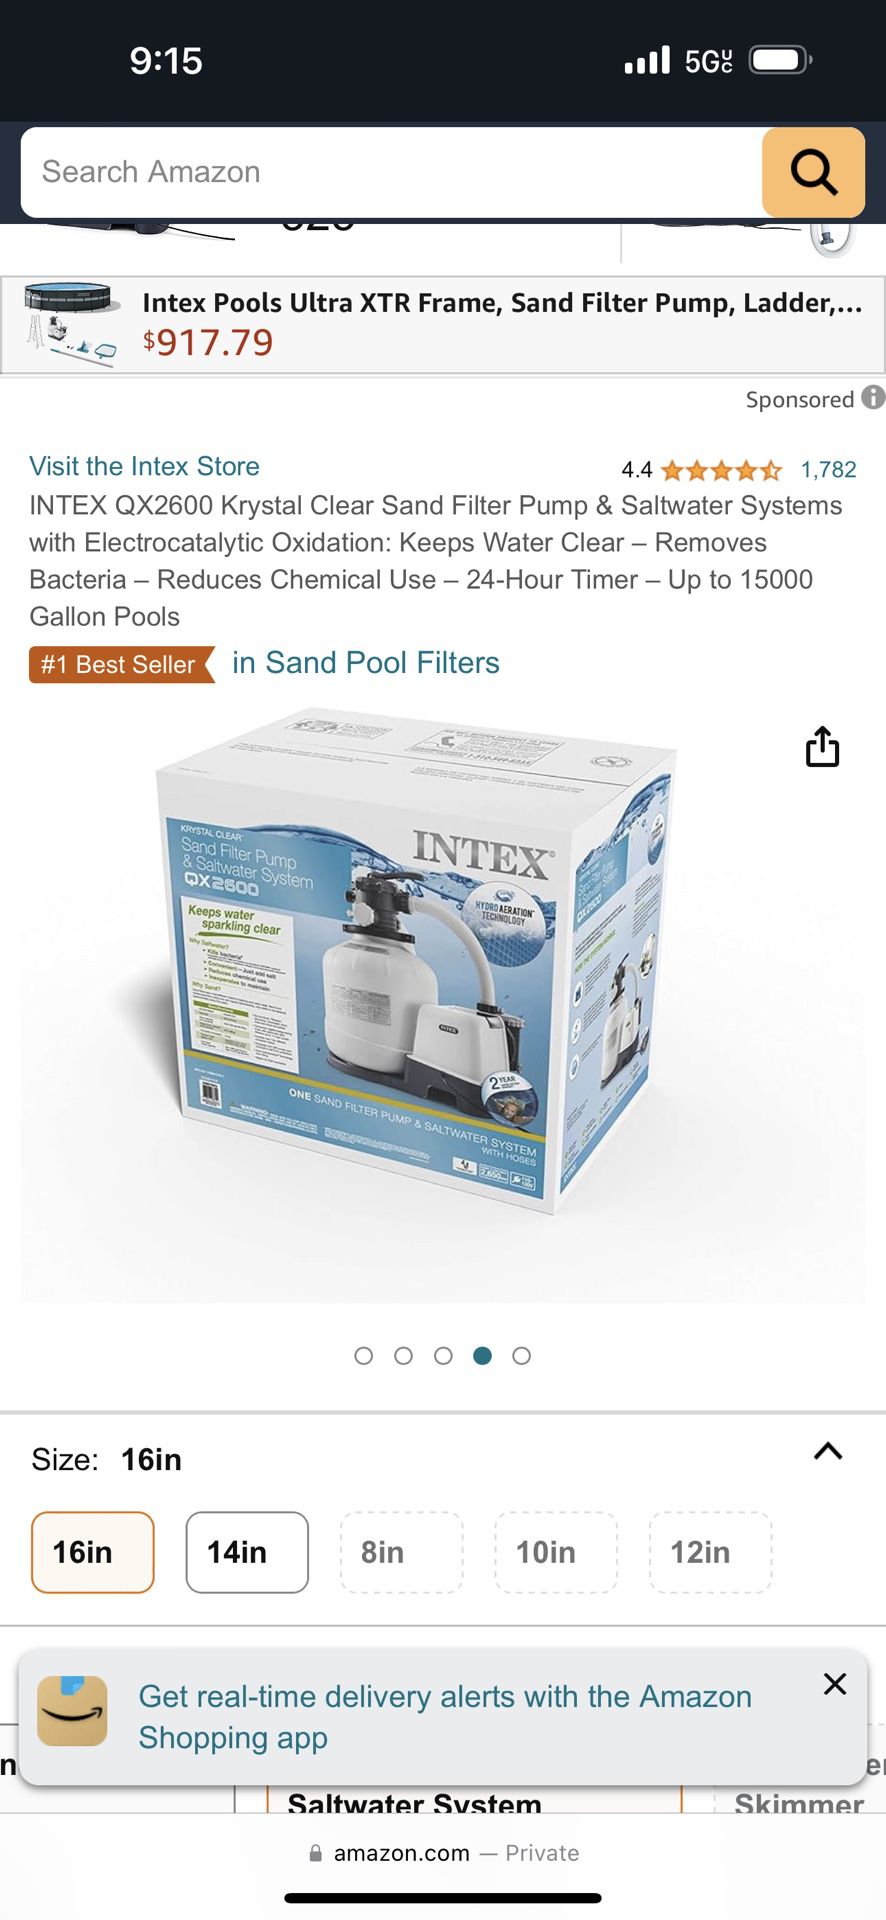 INTEX QX2600 Krystal Clear Sand Filter Pump & Saltwater Systems with Electrocatalytic Oxidation: Keeps Water Clear – Removes Bacteria – Reduces Chemic